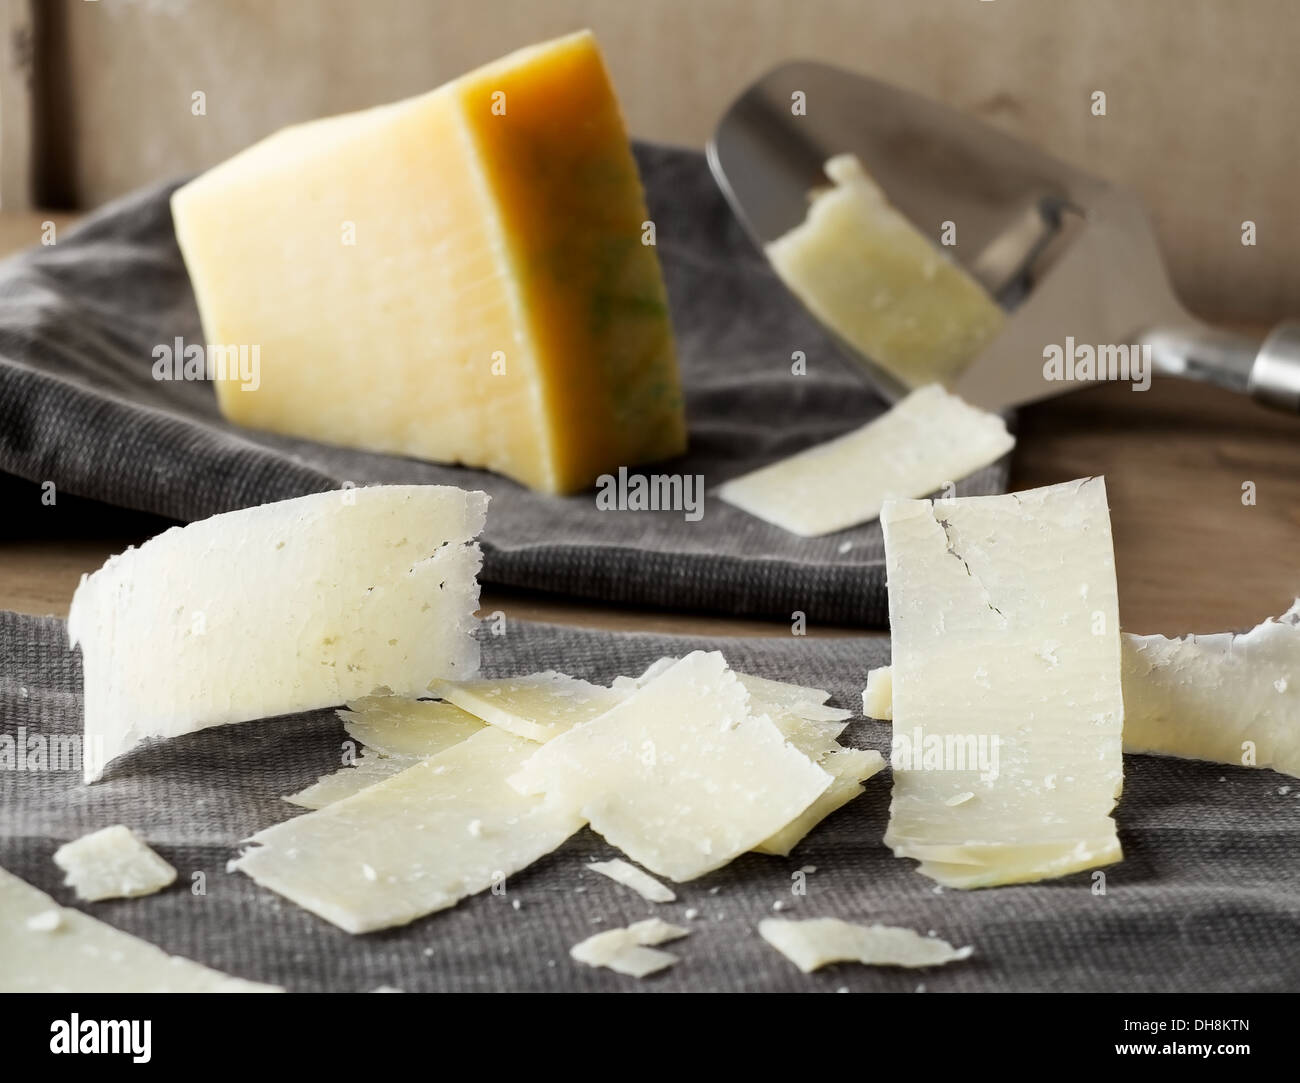 Parmesan cheese slices on a rustic fabric. Stock Photo